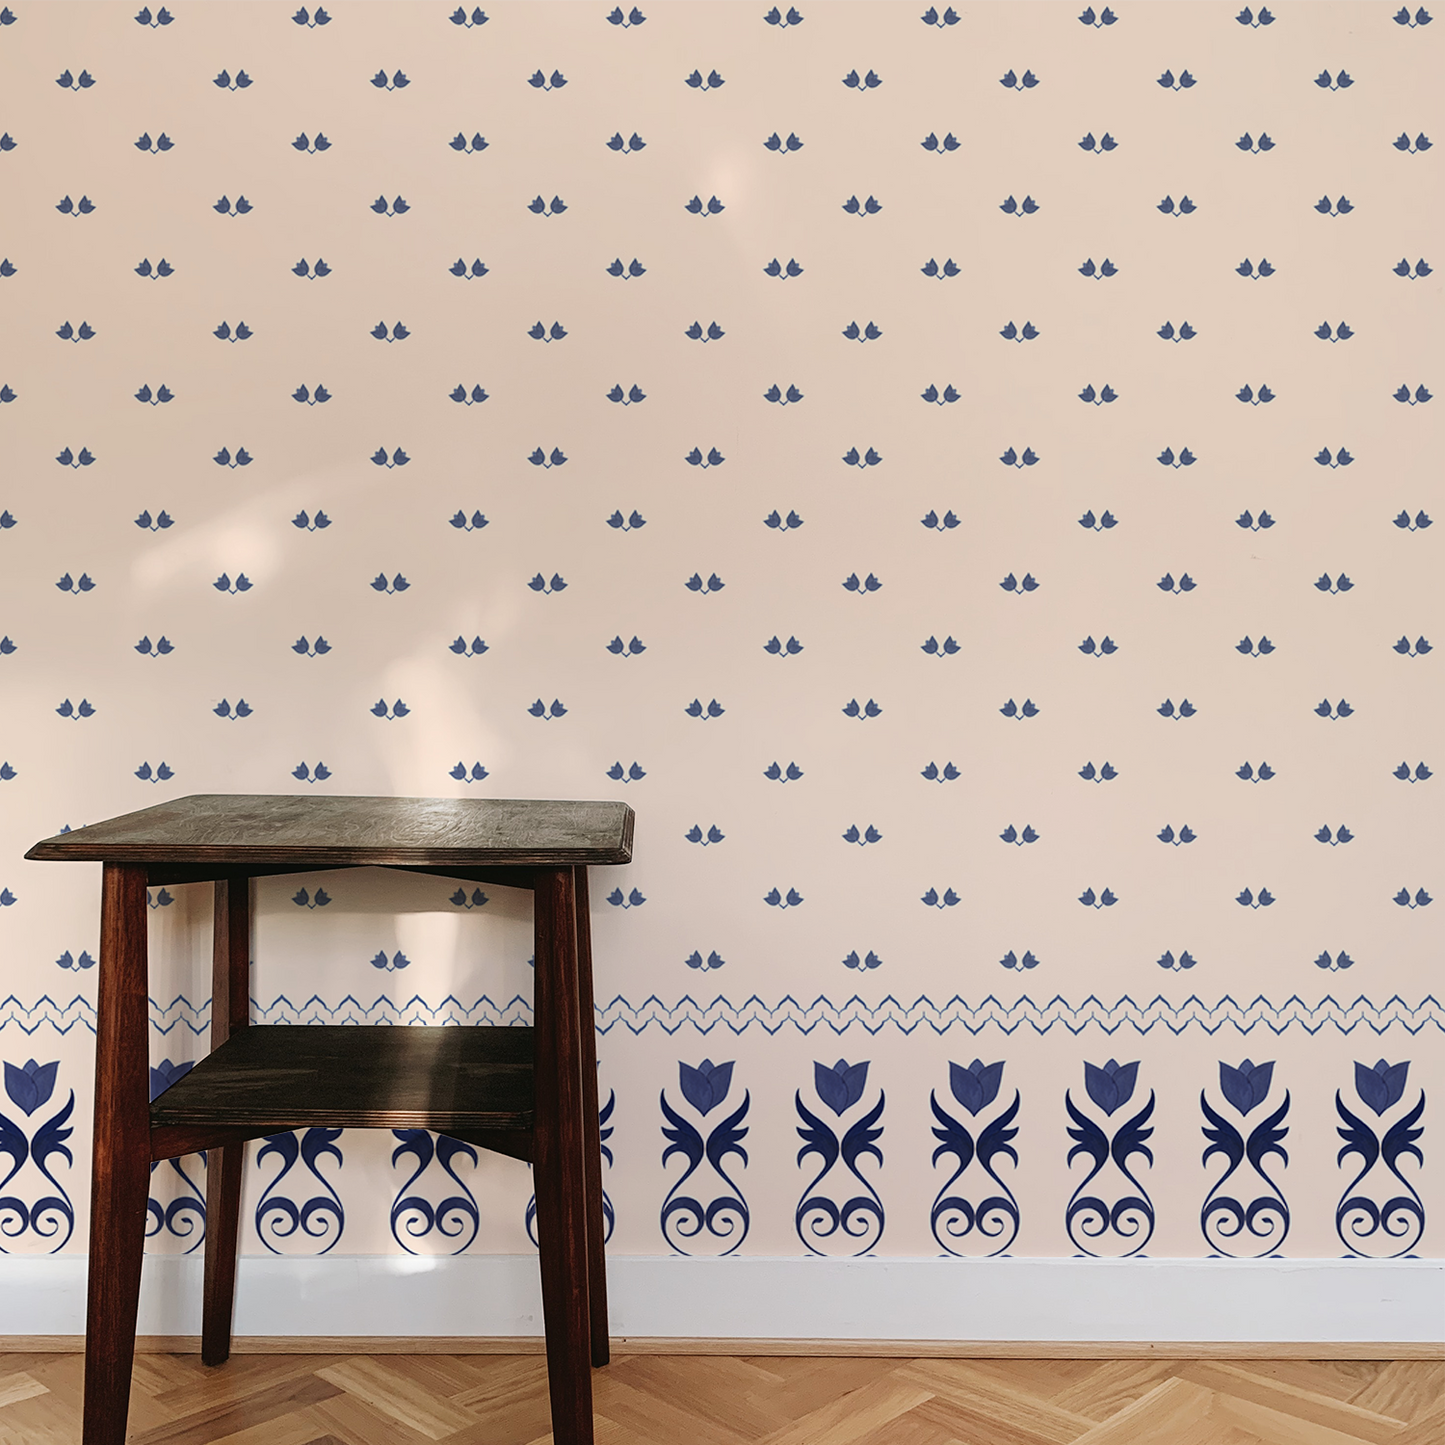 Bell Harmony Blue Wallpaper customised in any colours